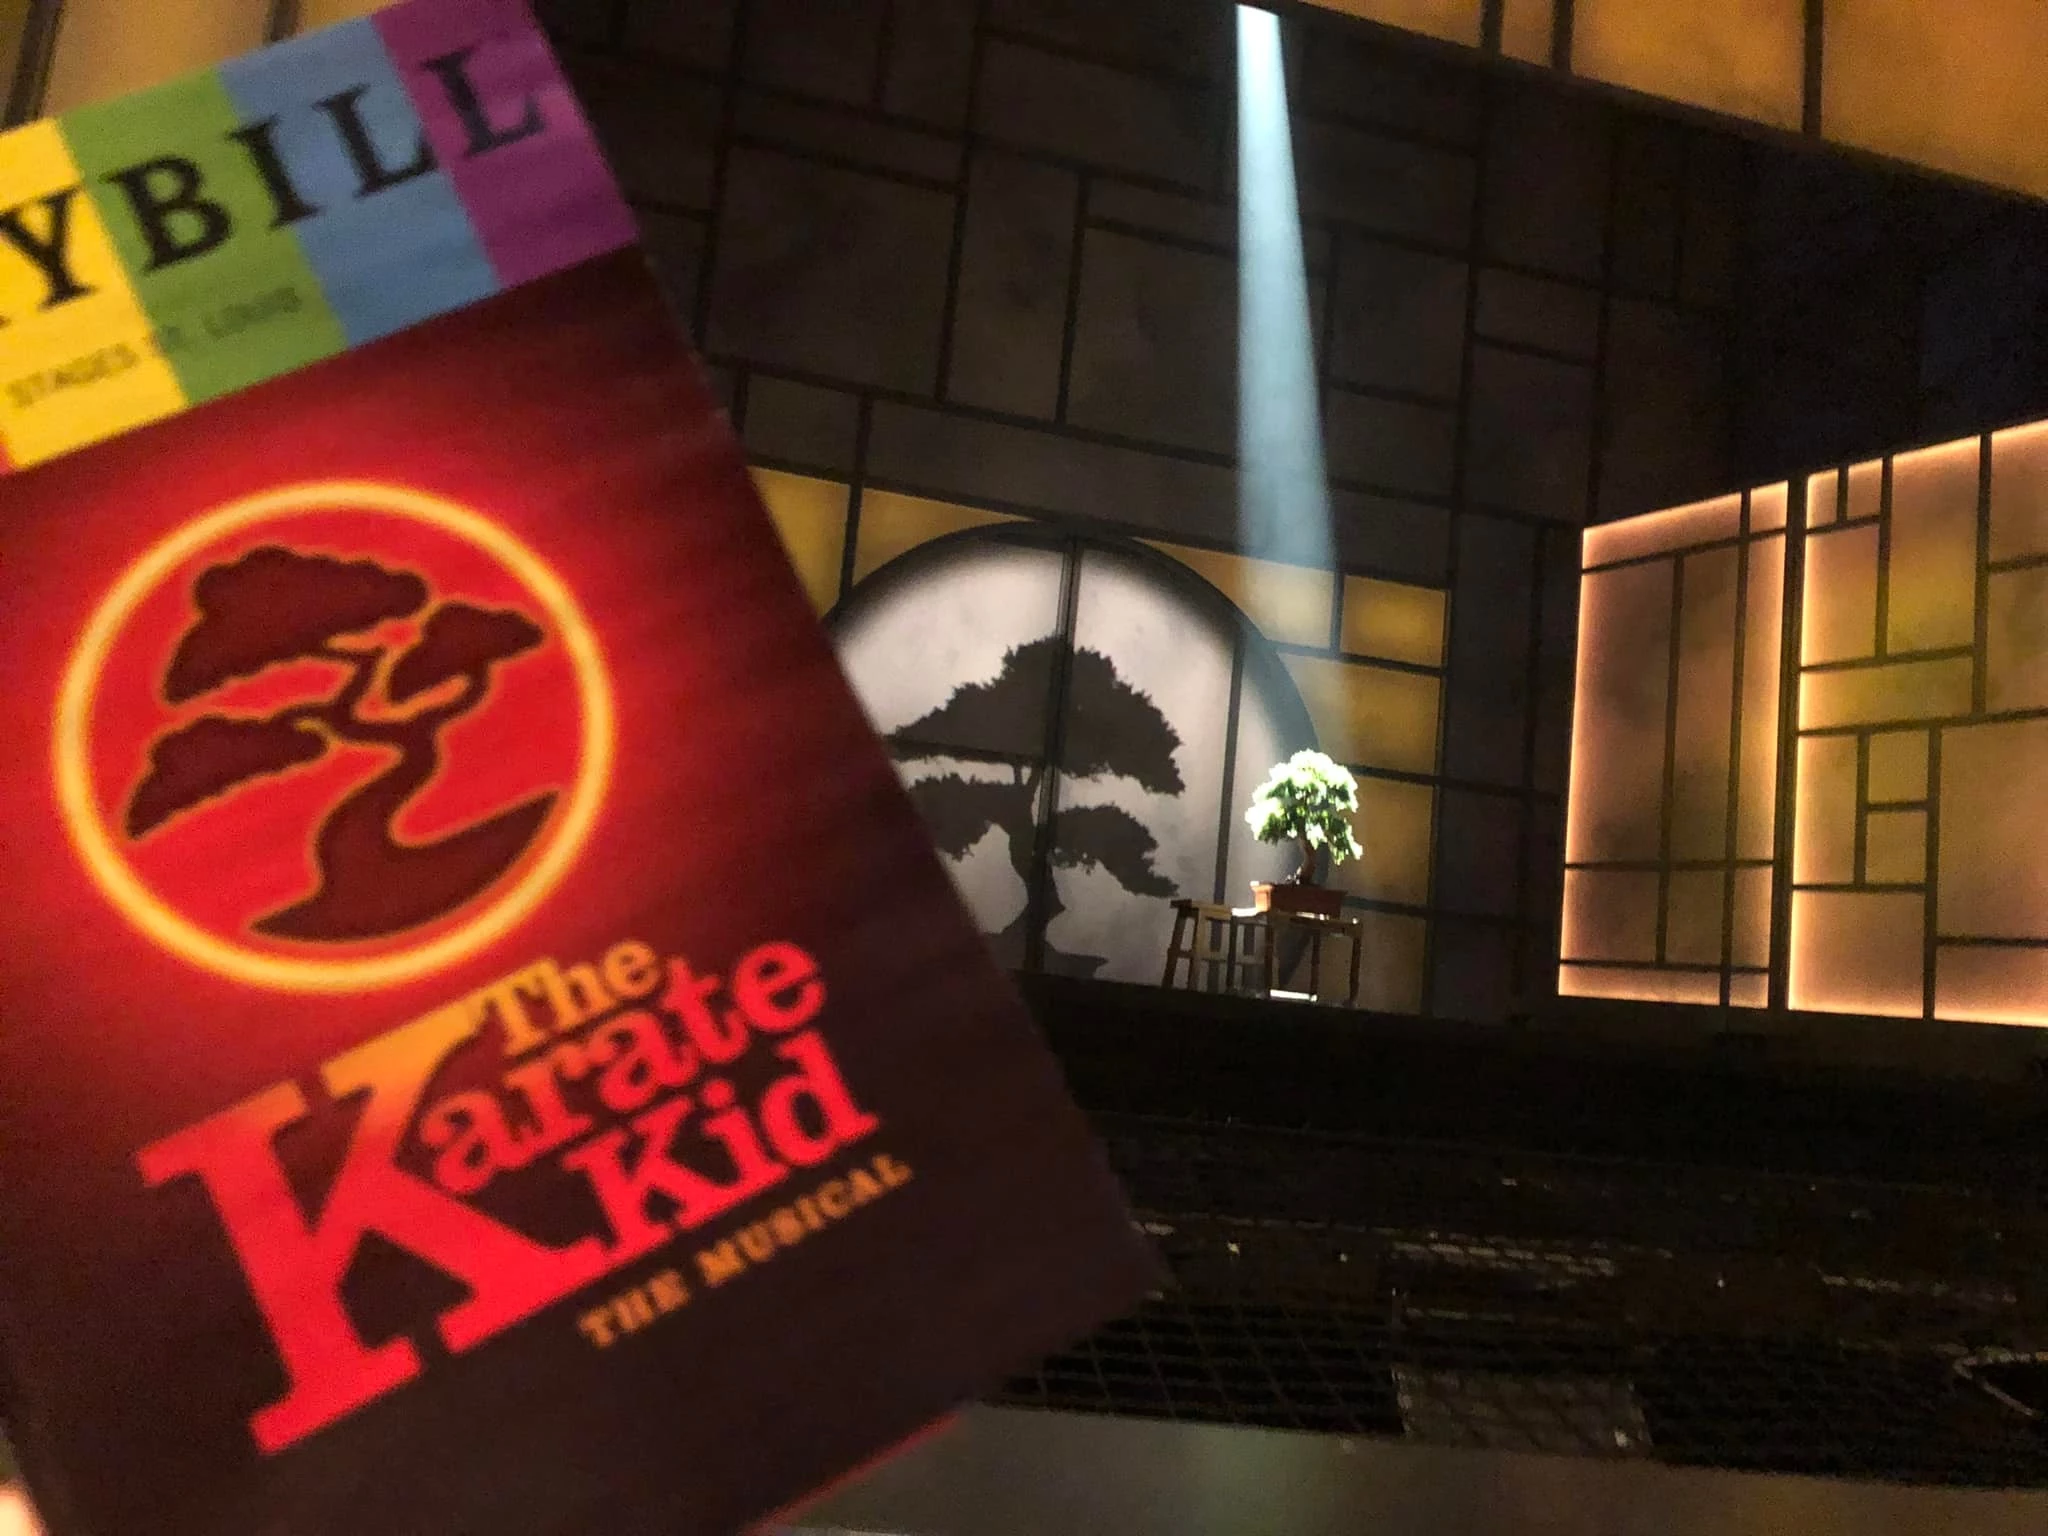 Ti år Efterforskning uld Review of The Karate Kid: The Musical at Stages St. Louis